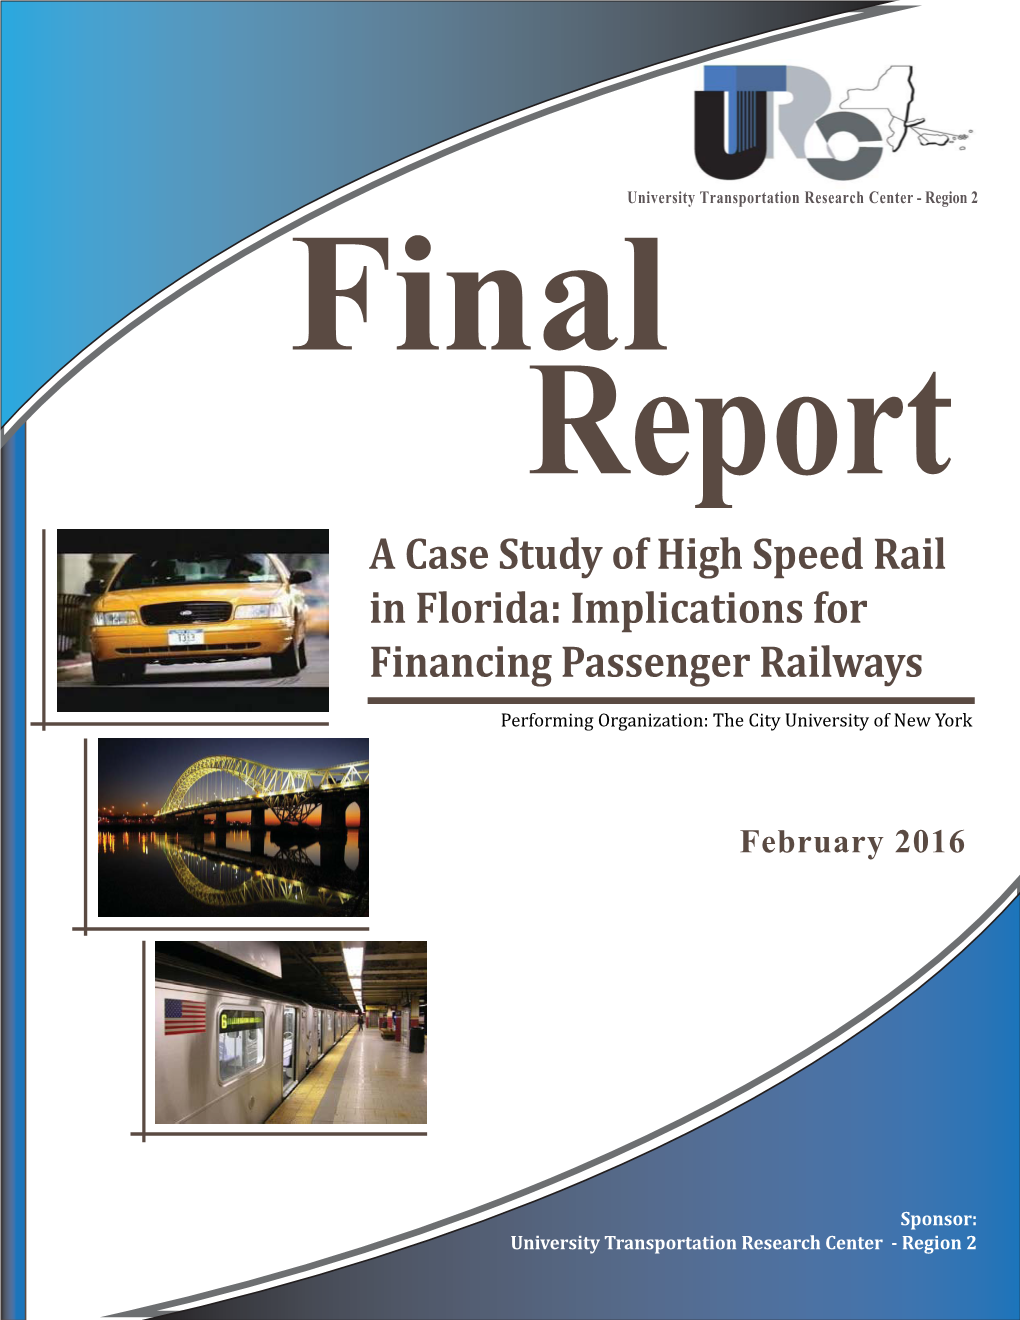 A Case Study of High Speed Rail in Florida: Implications for Financing Passenger Railways